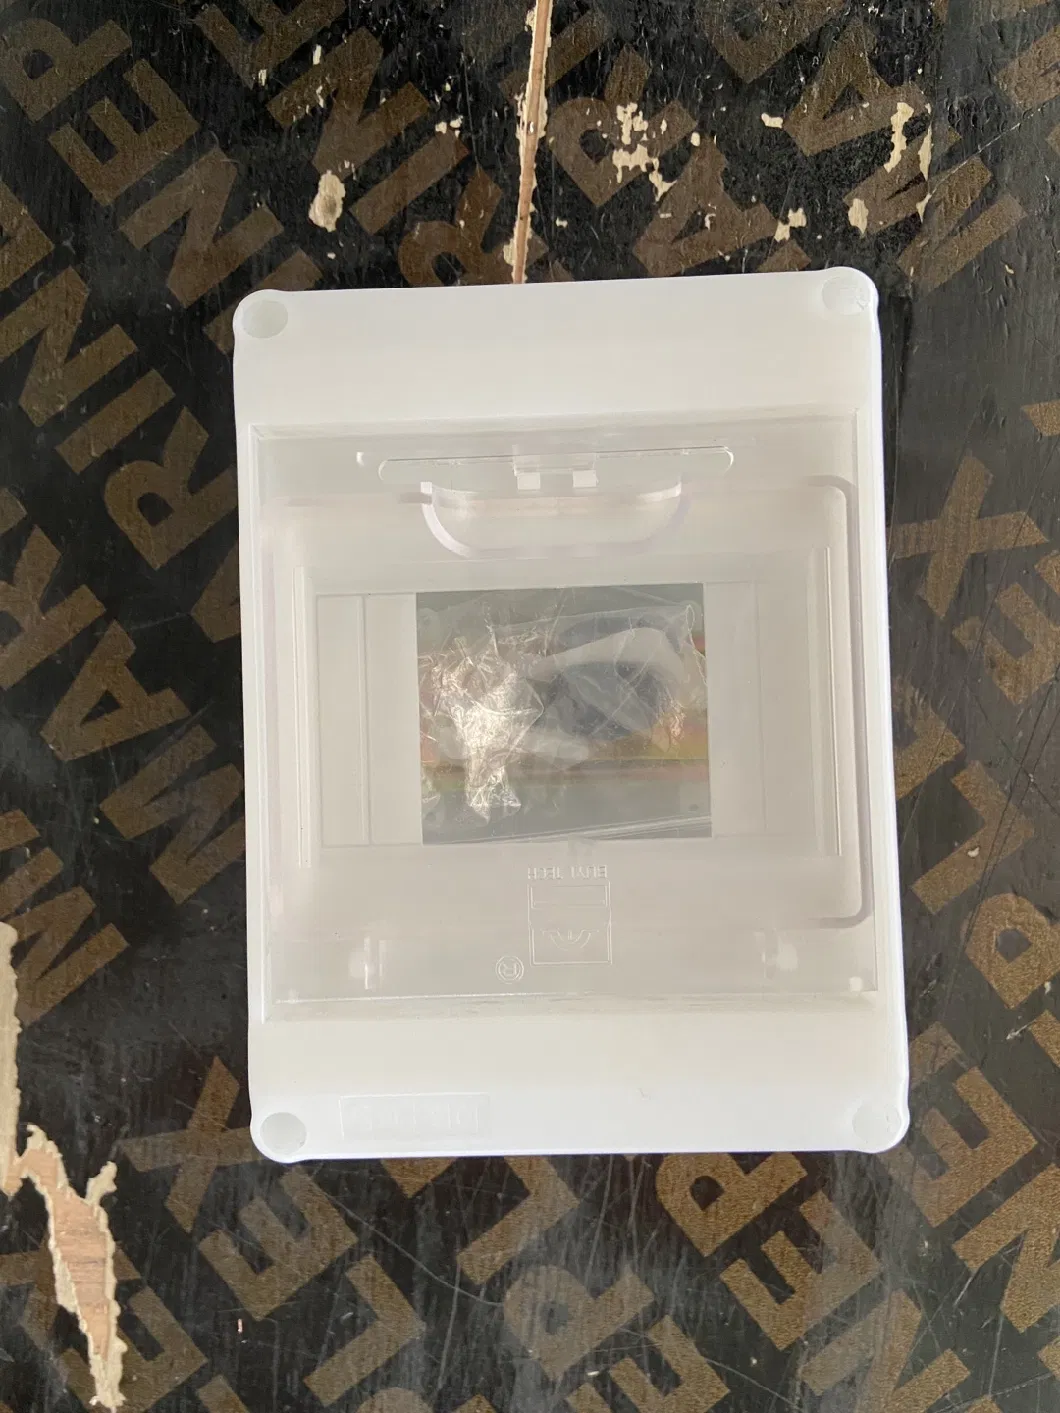 Custom Plastic ABS Enclosure Box IP65 Connection PVC Cable Screw Waterproof Electrical Junction Box